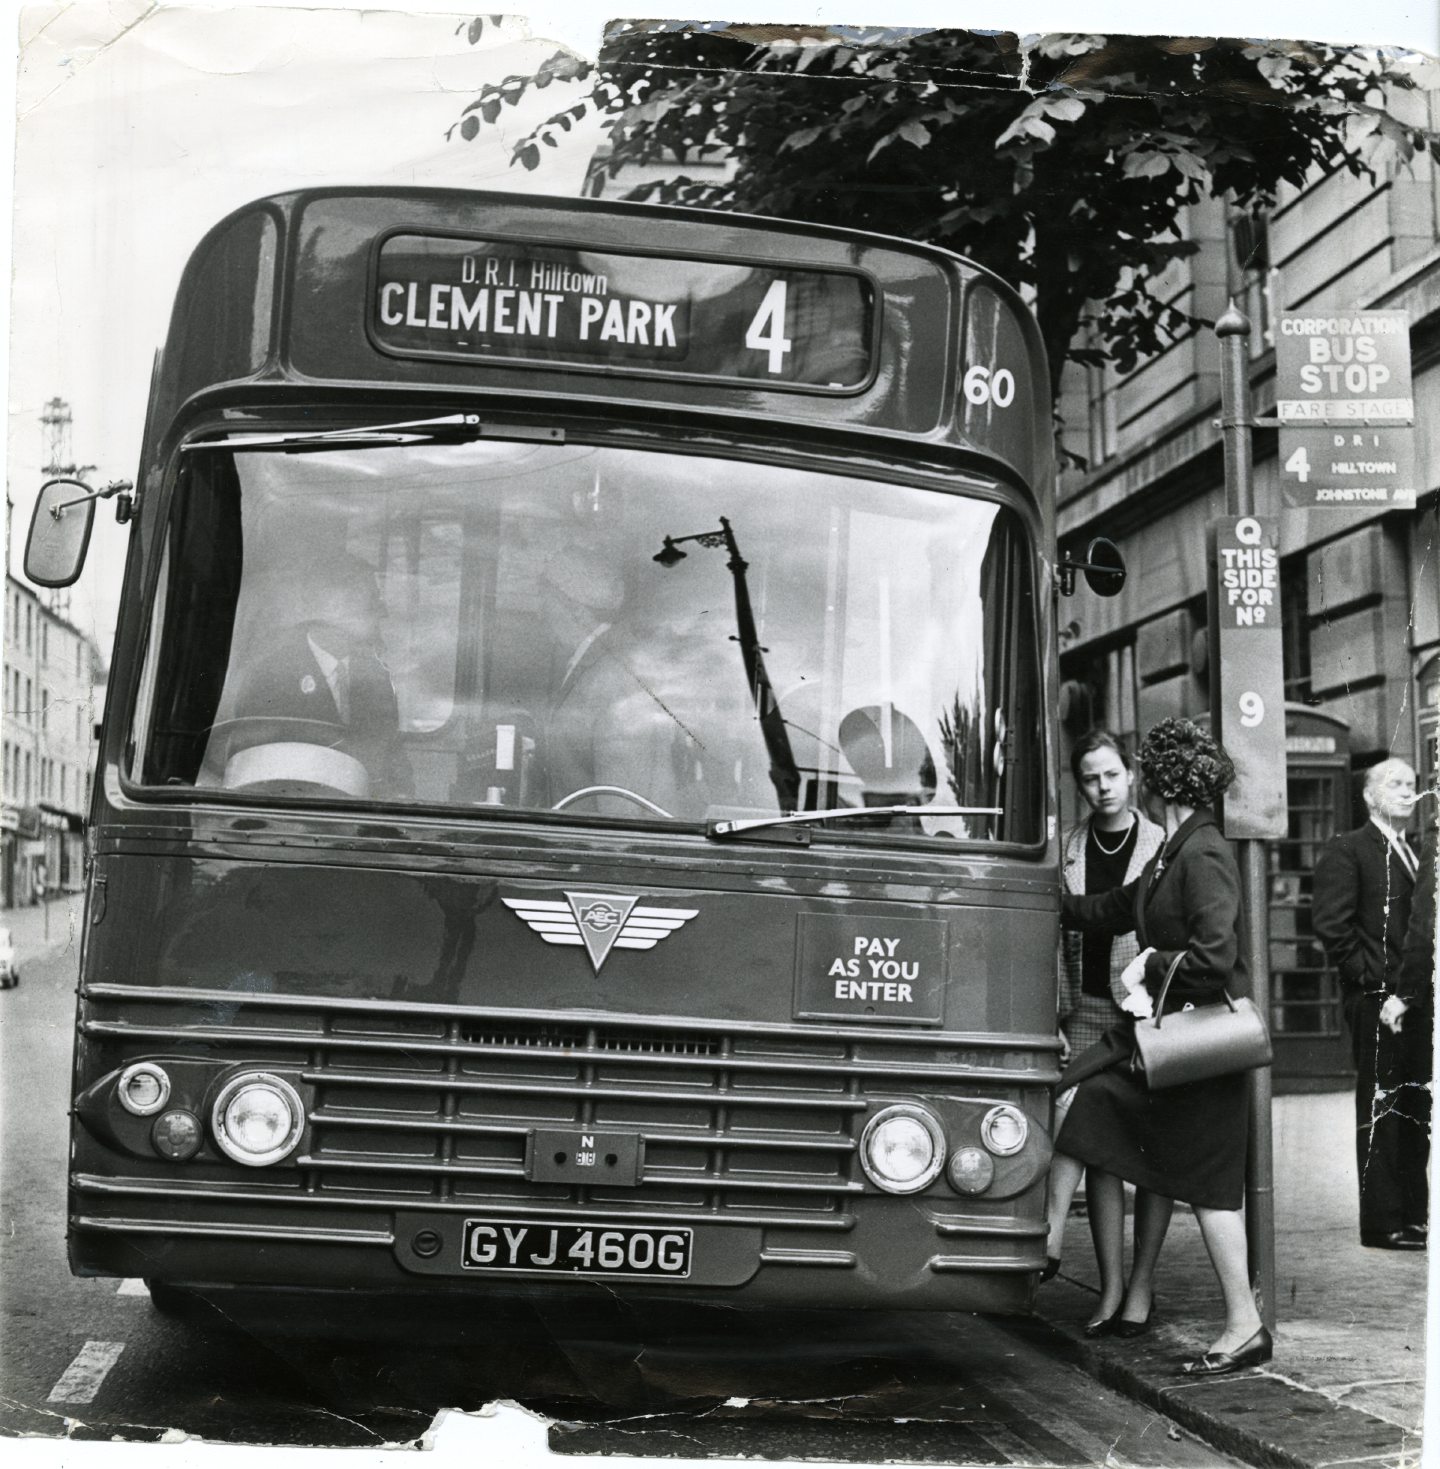 Passengers boarding the bus at Shore Terrace back in 1969. Image: DC Thomson.